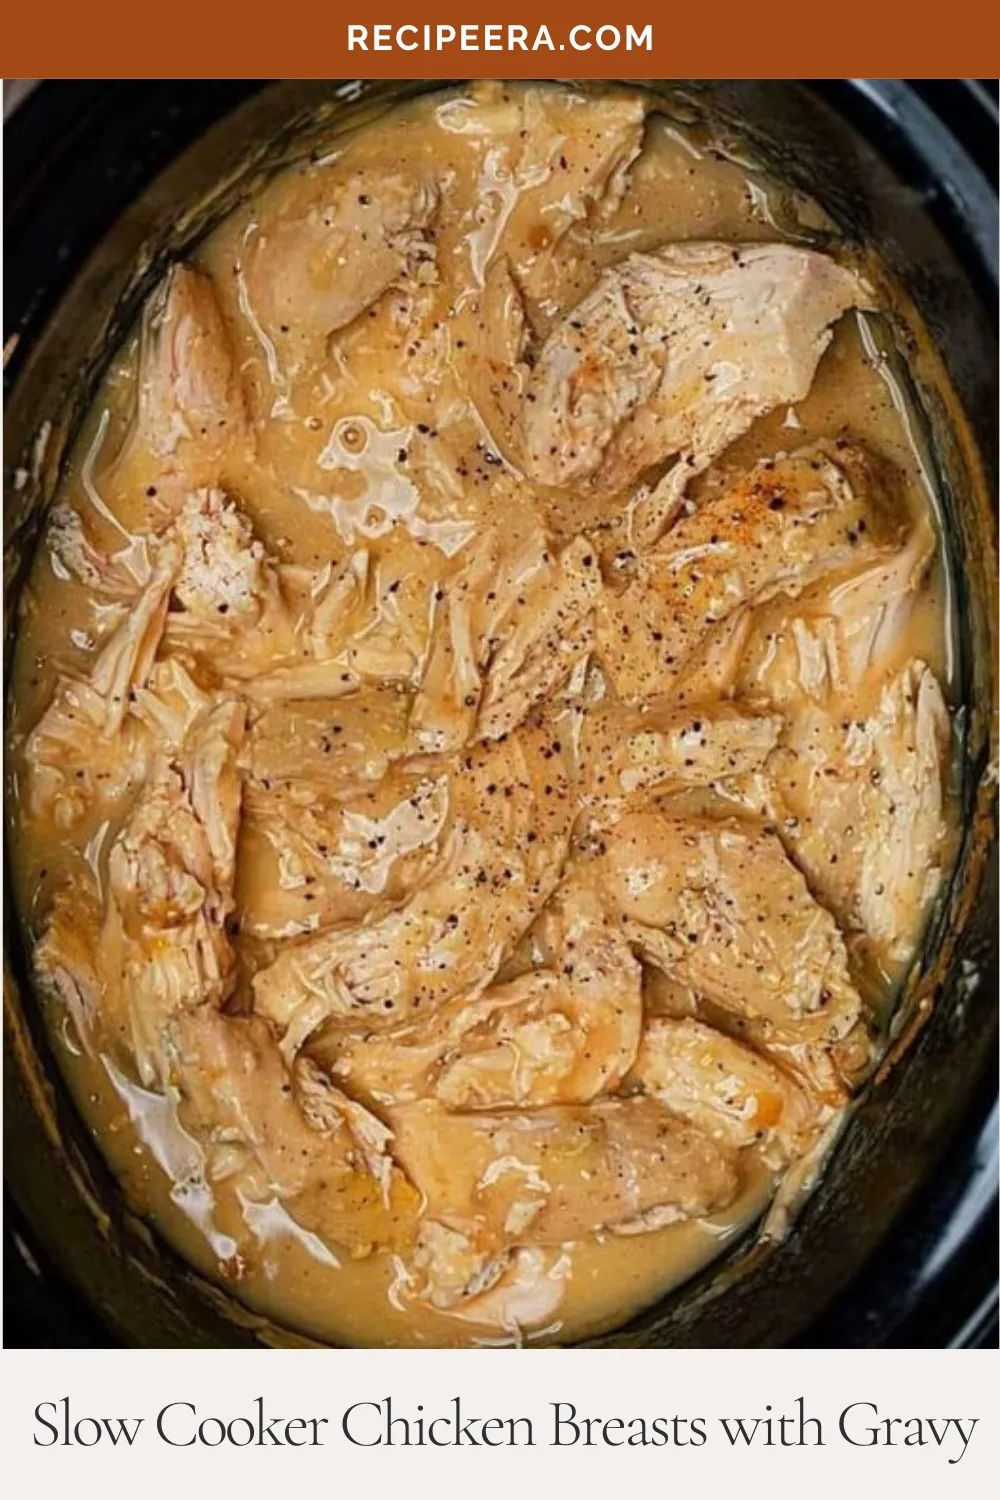 Slow Cooker Chicken Breasts with Gravy